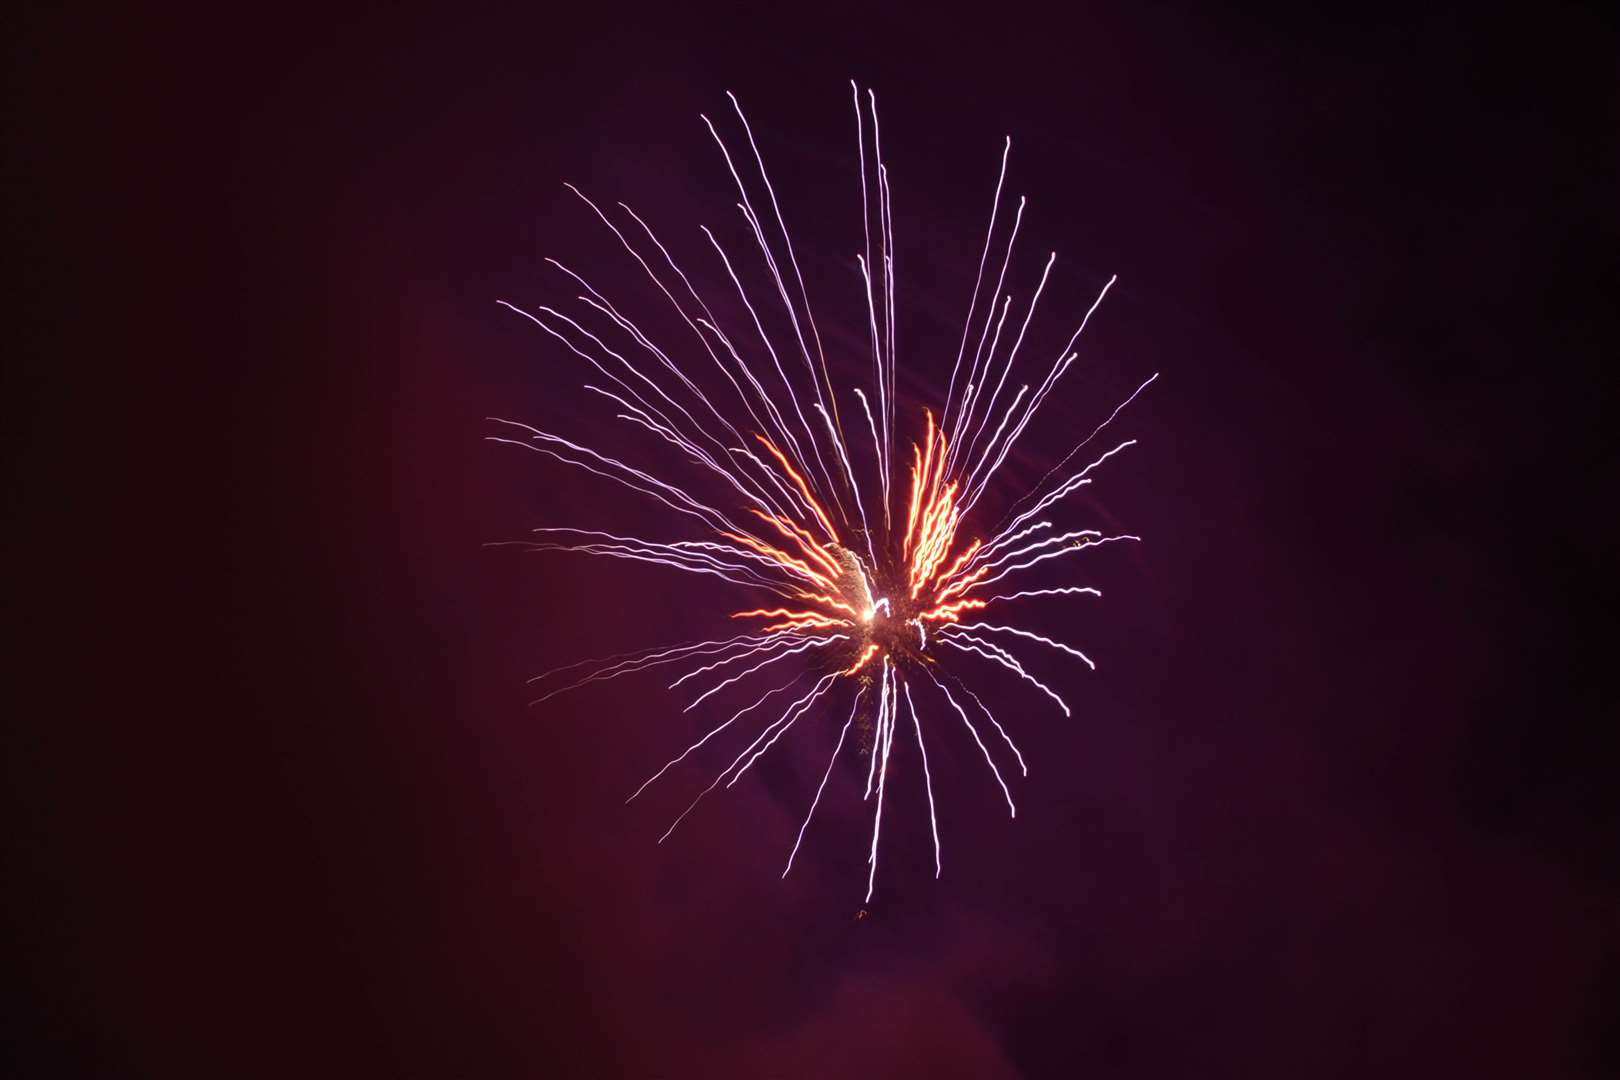 A previous fireworks display at the Spitfire Ground in Canterbury